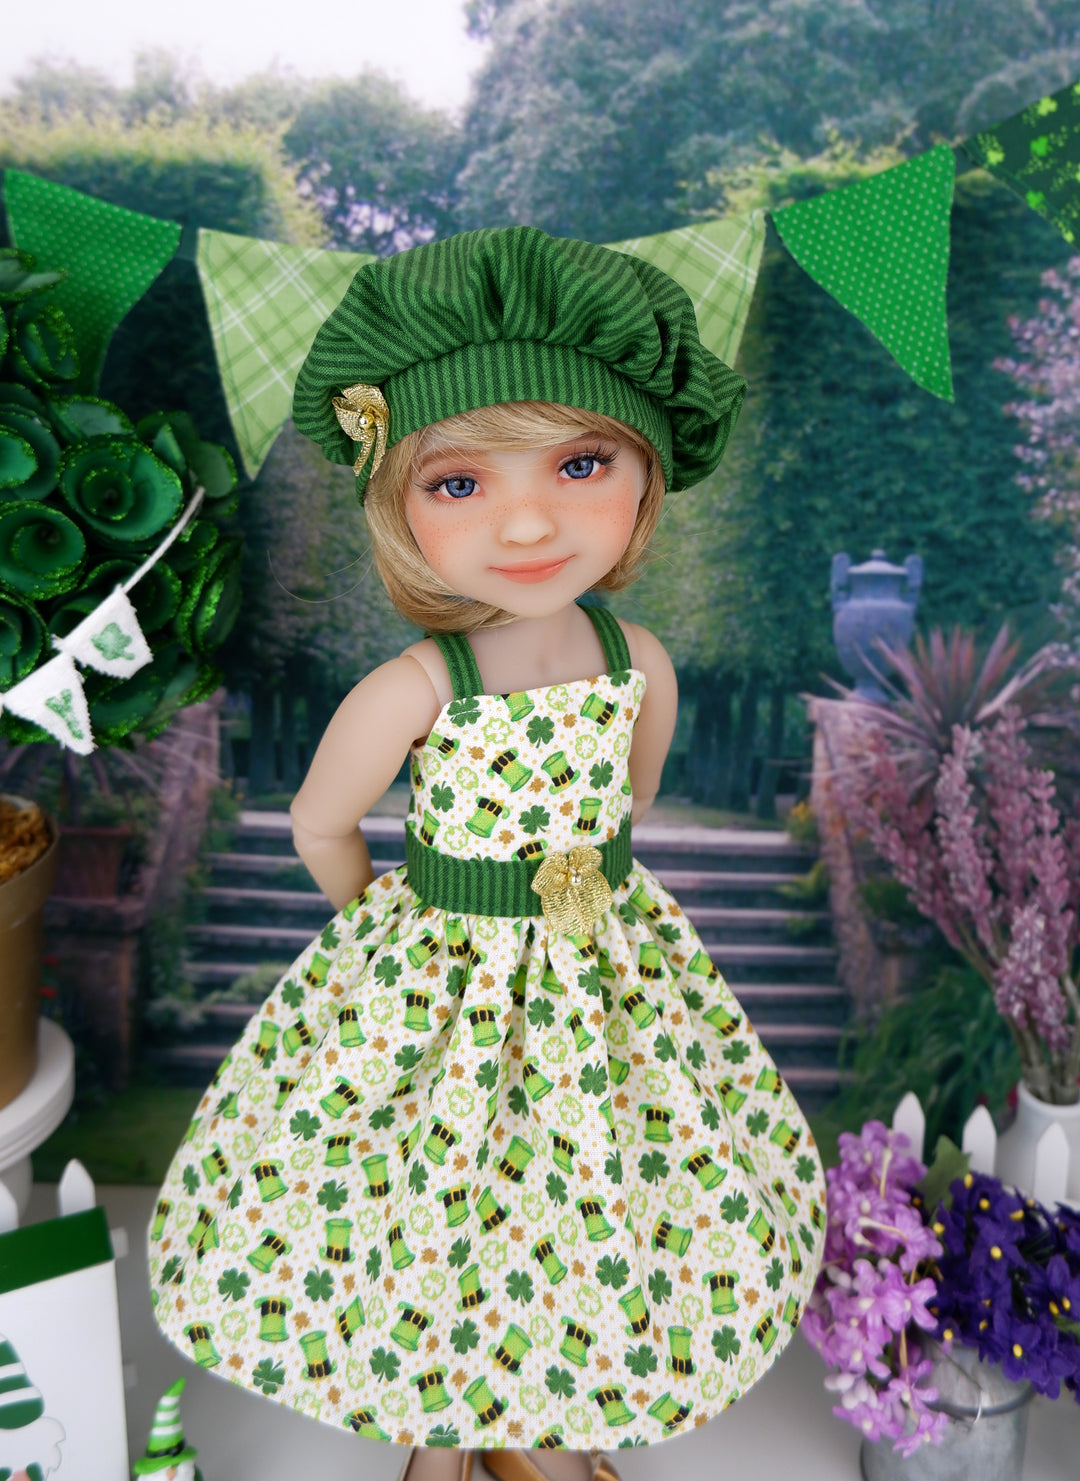 Leprechaun Hats - dress with shoes for Ruby Red Fashion Friends doll